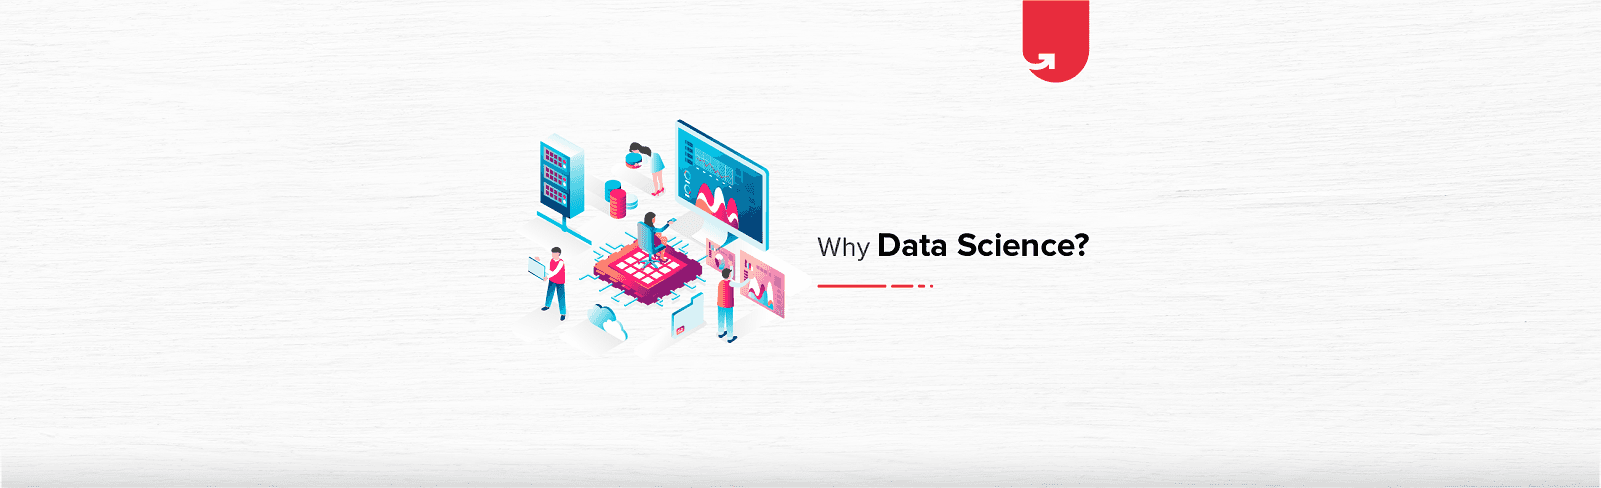 Why is Data Science Important? 8 Ways Data Science Brings Value to the Business